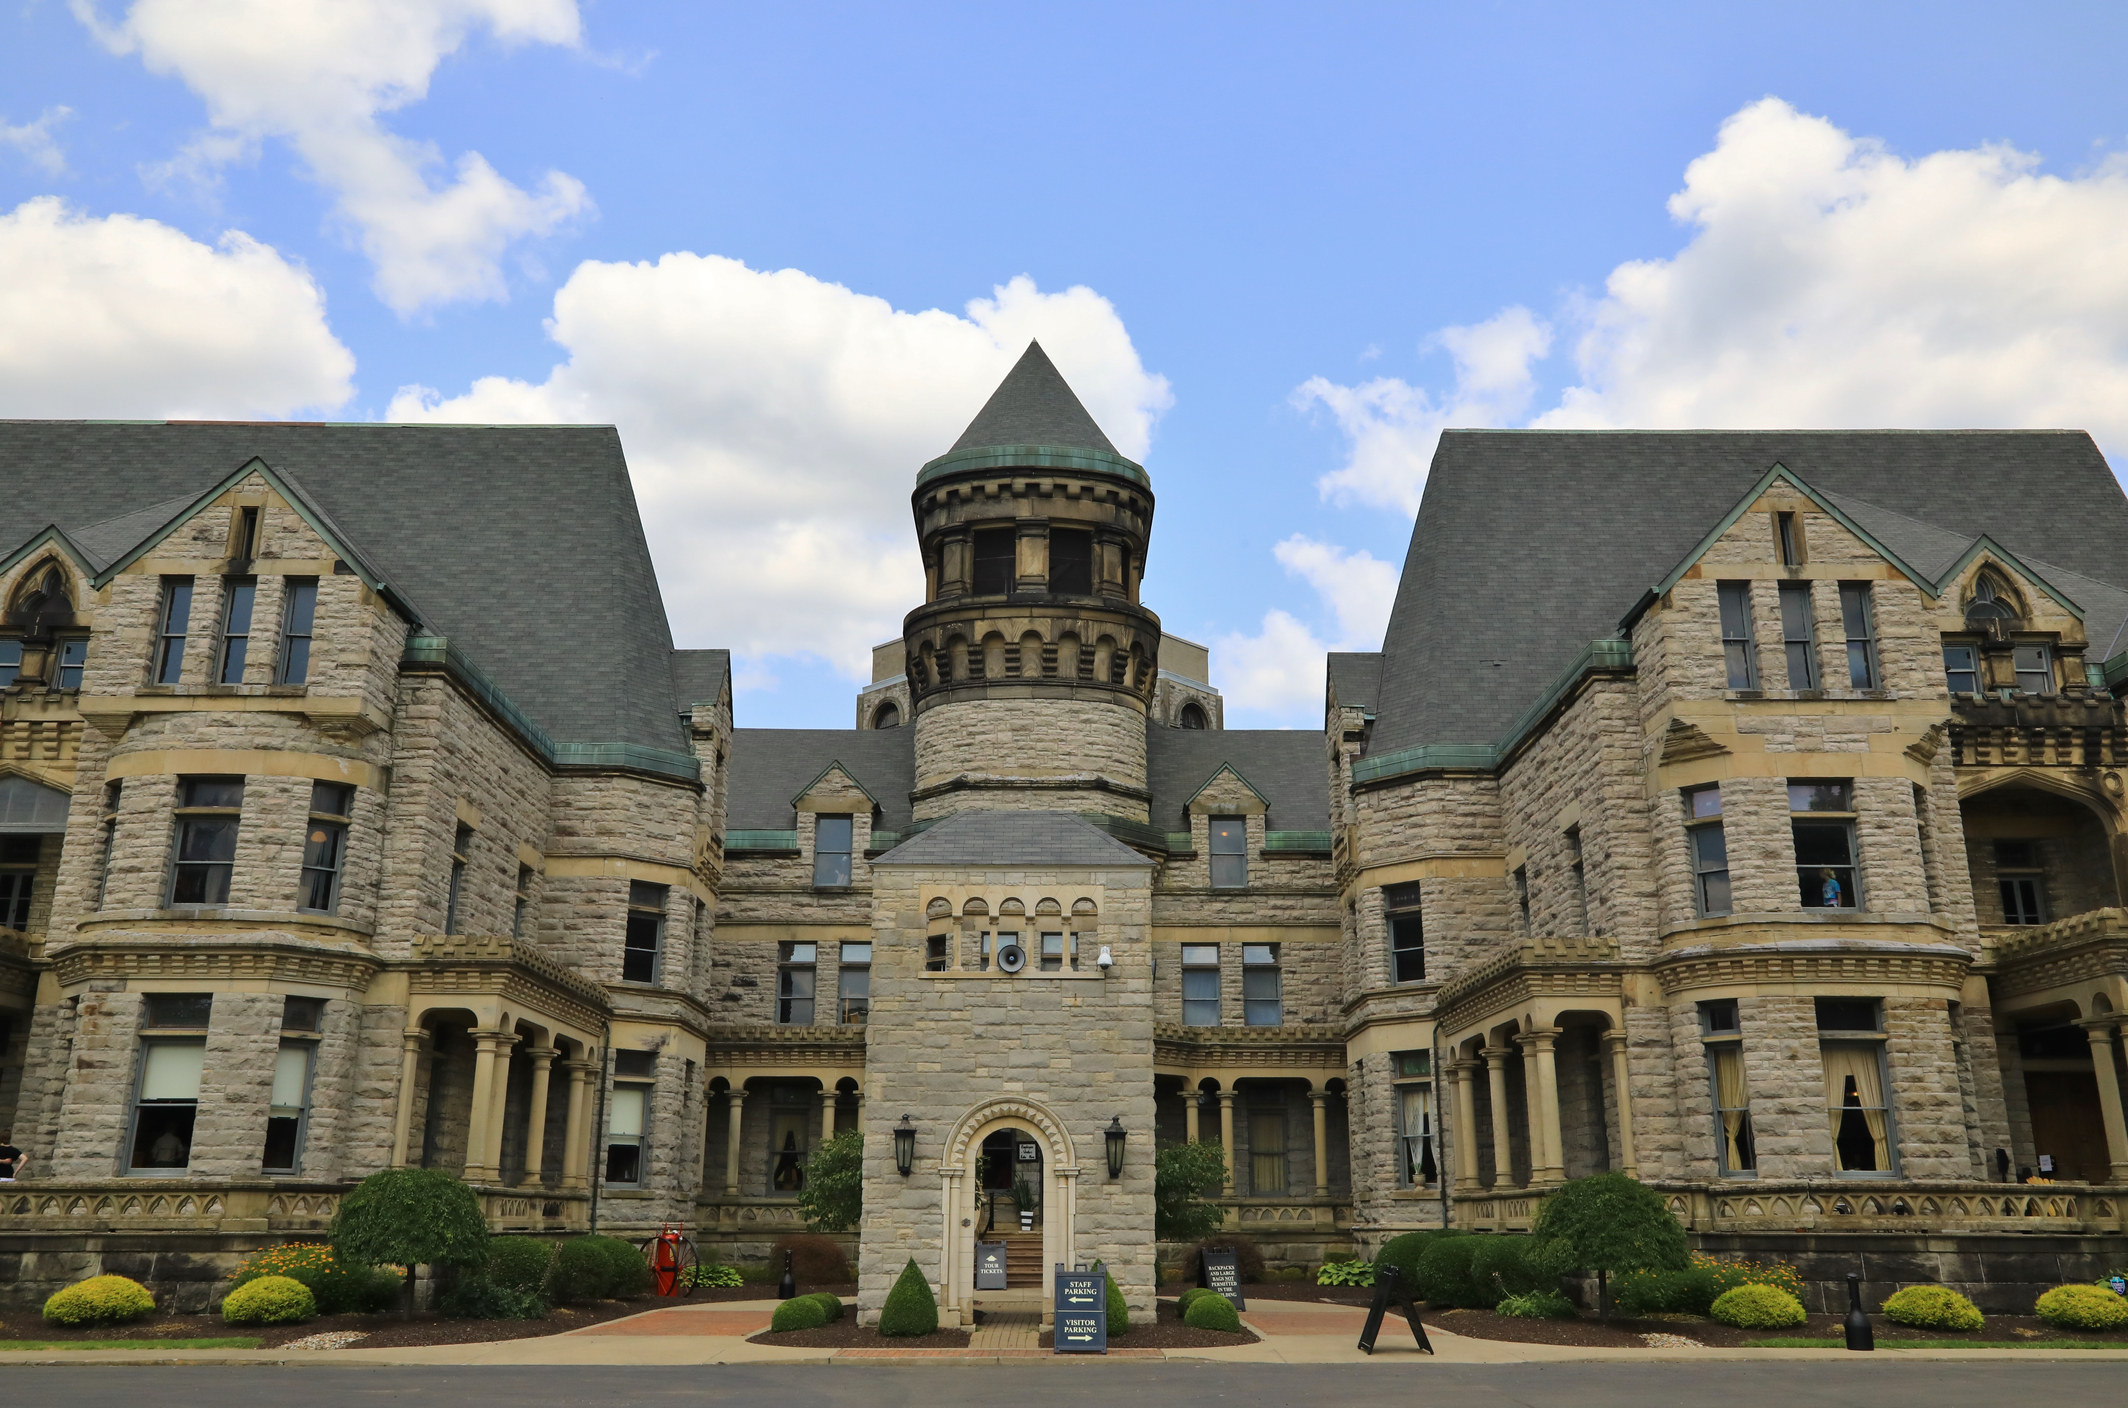 the reformatory looming high and haunting